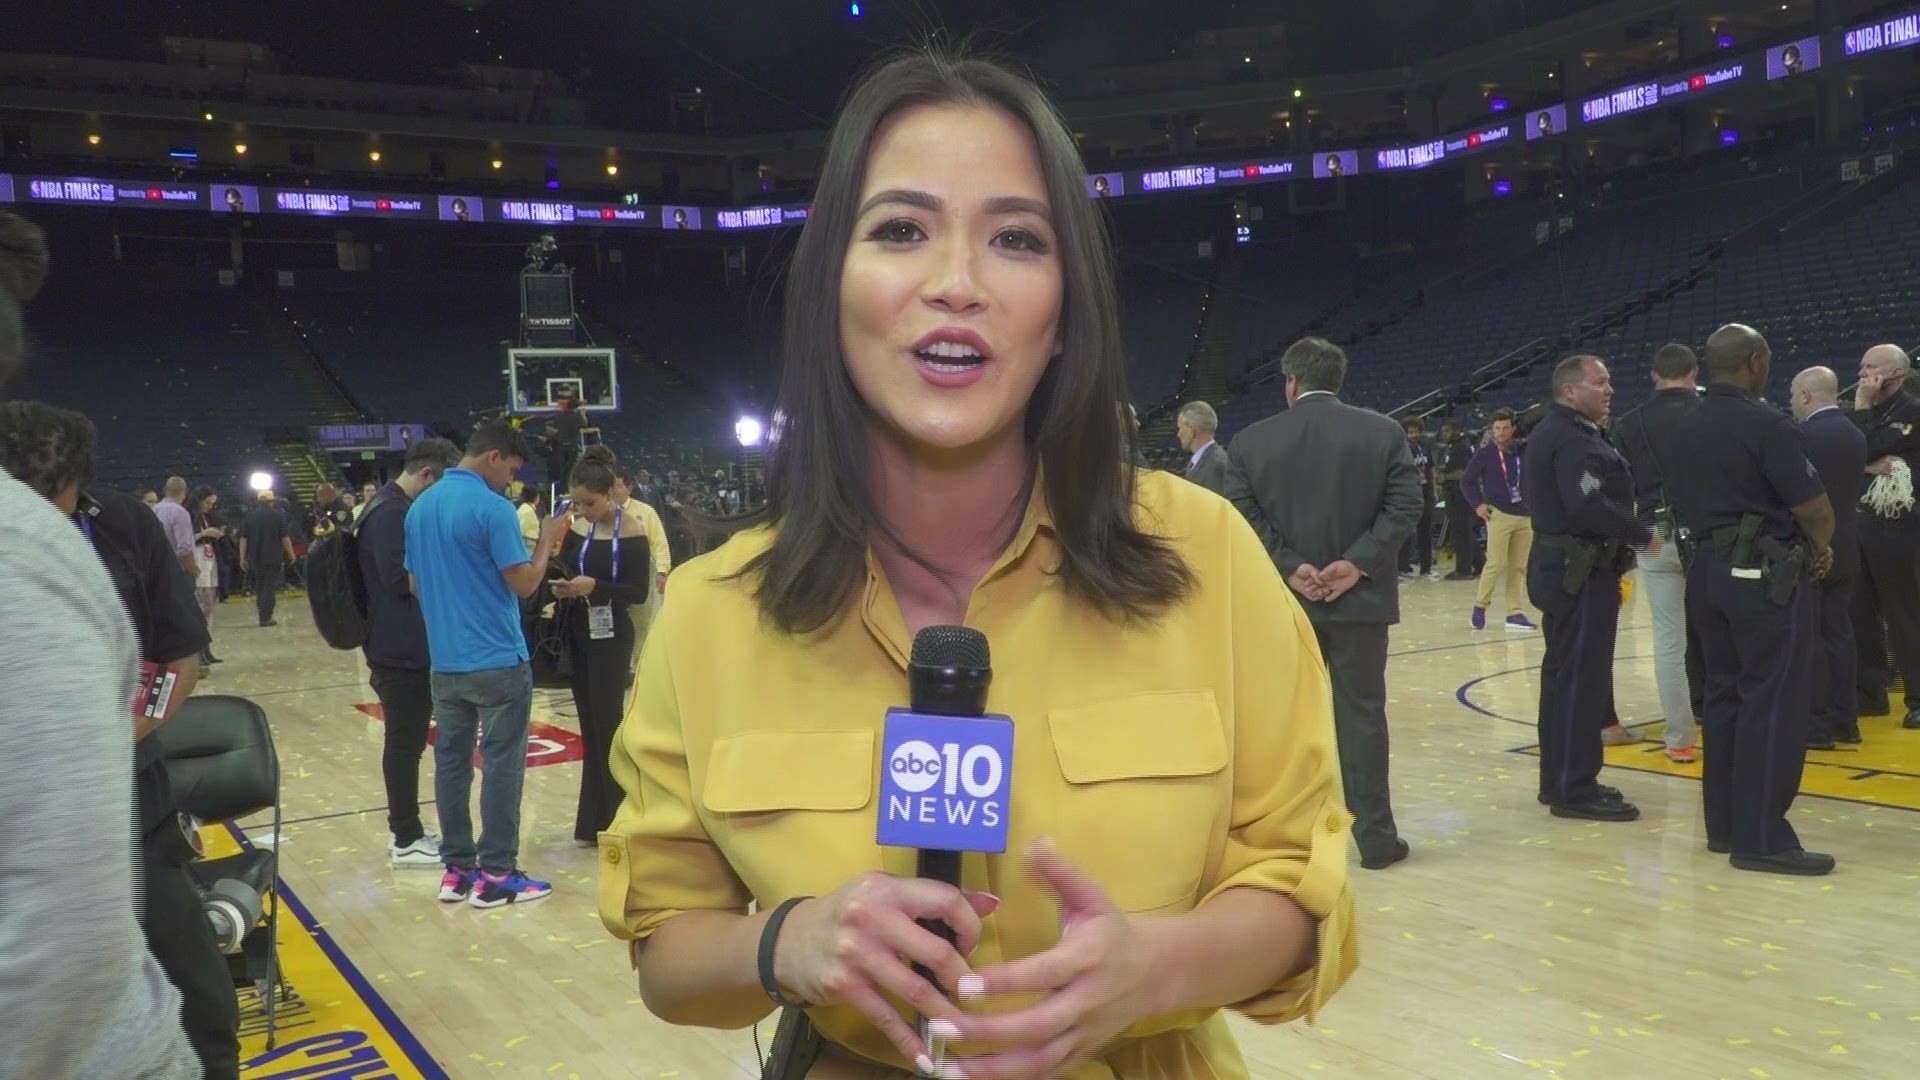 Frances Wang goes on a behind-the-scenes look of Game 1 of the 2018 NBA Finals.